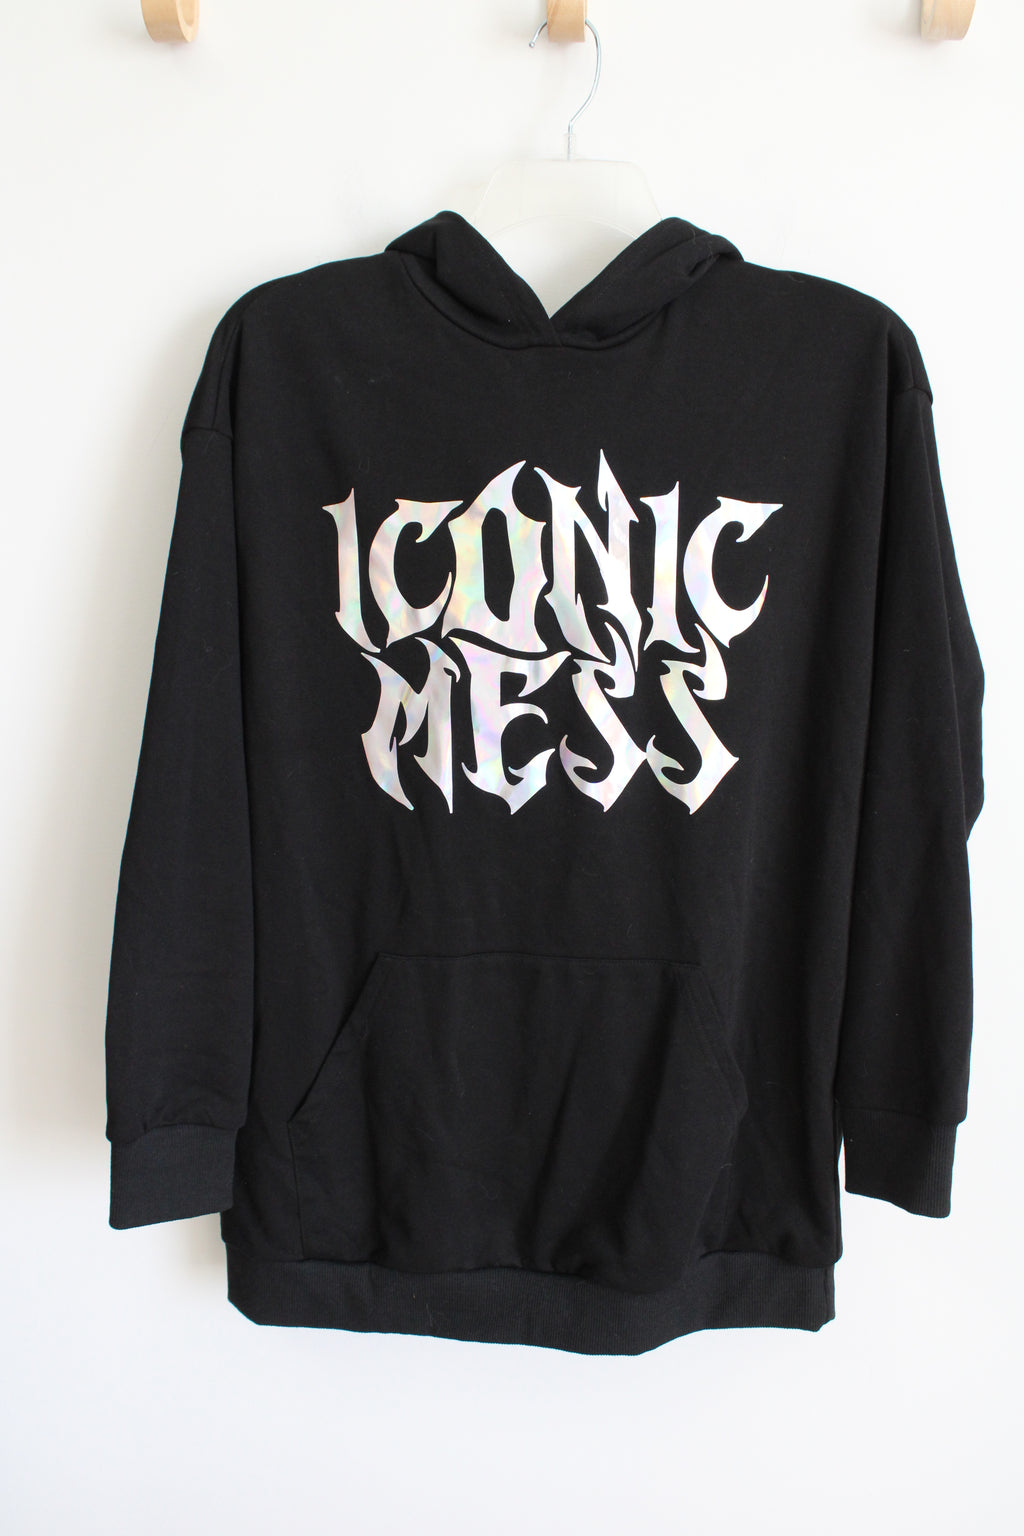 Cider Iconic Mess Black Graphic Oversized Hoodie | XS